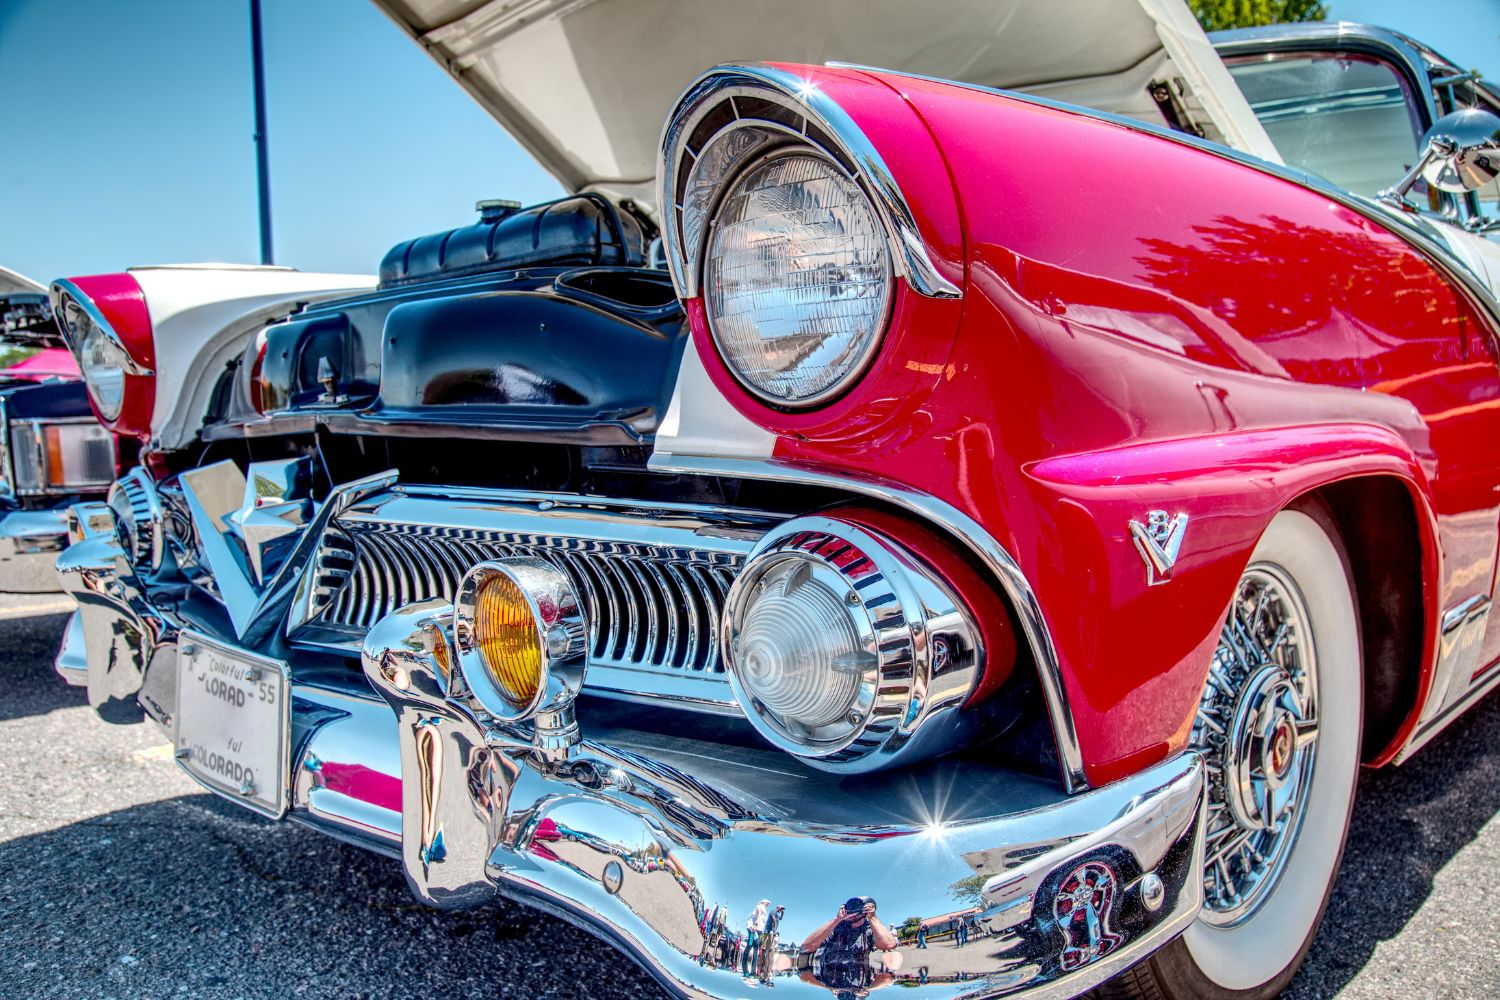 A shiny, bright red vintage car.